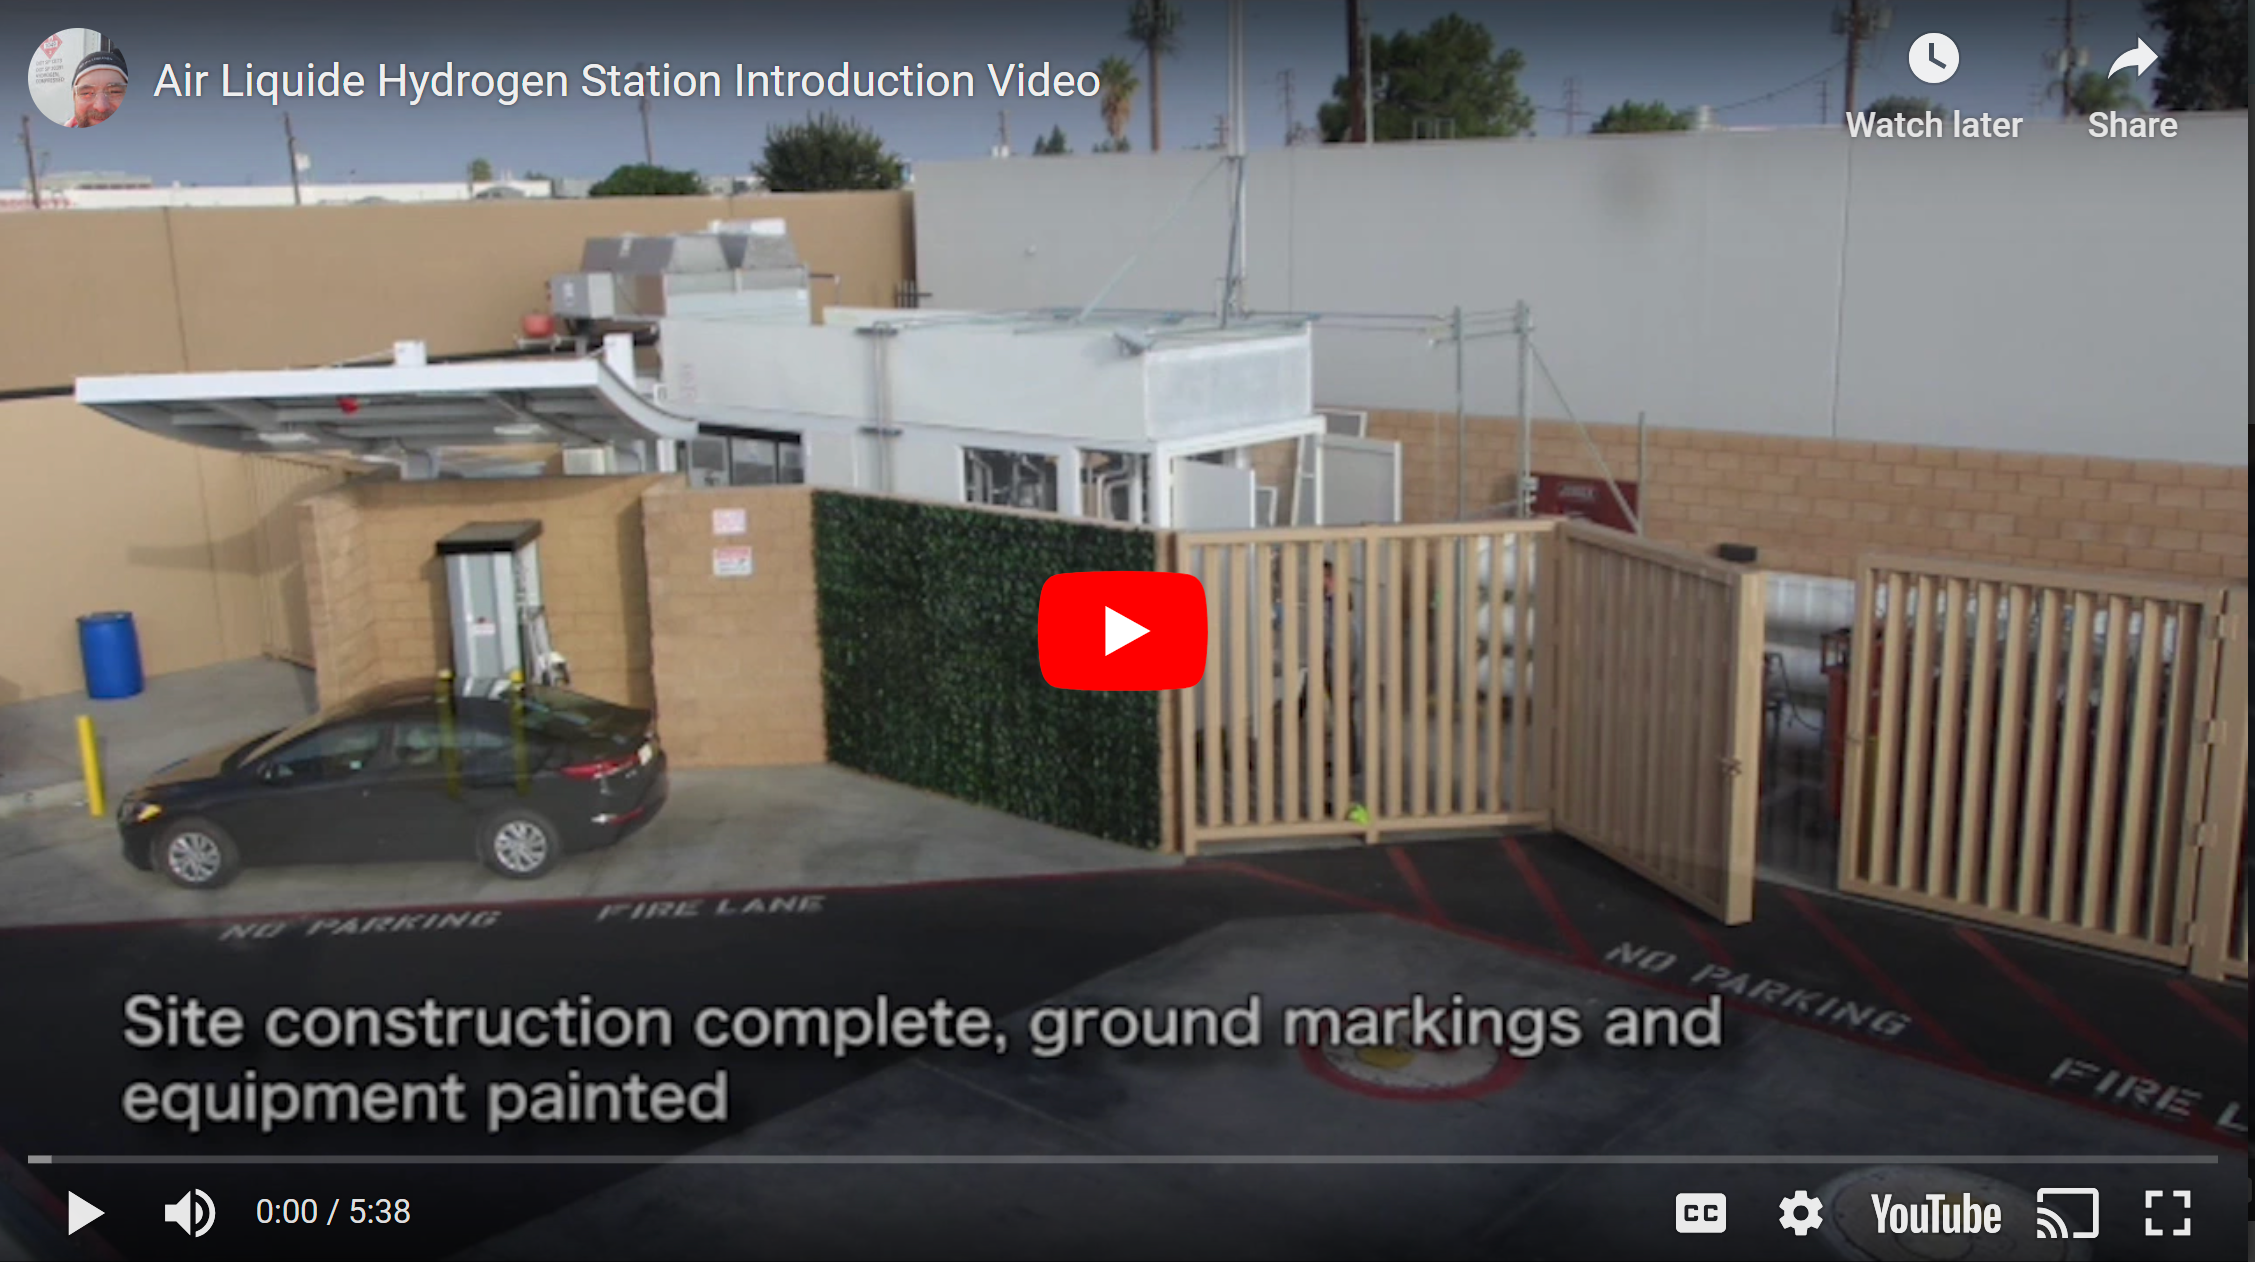 Air Liquide Hydrogen Station Introduction Video